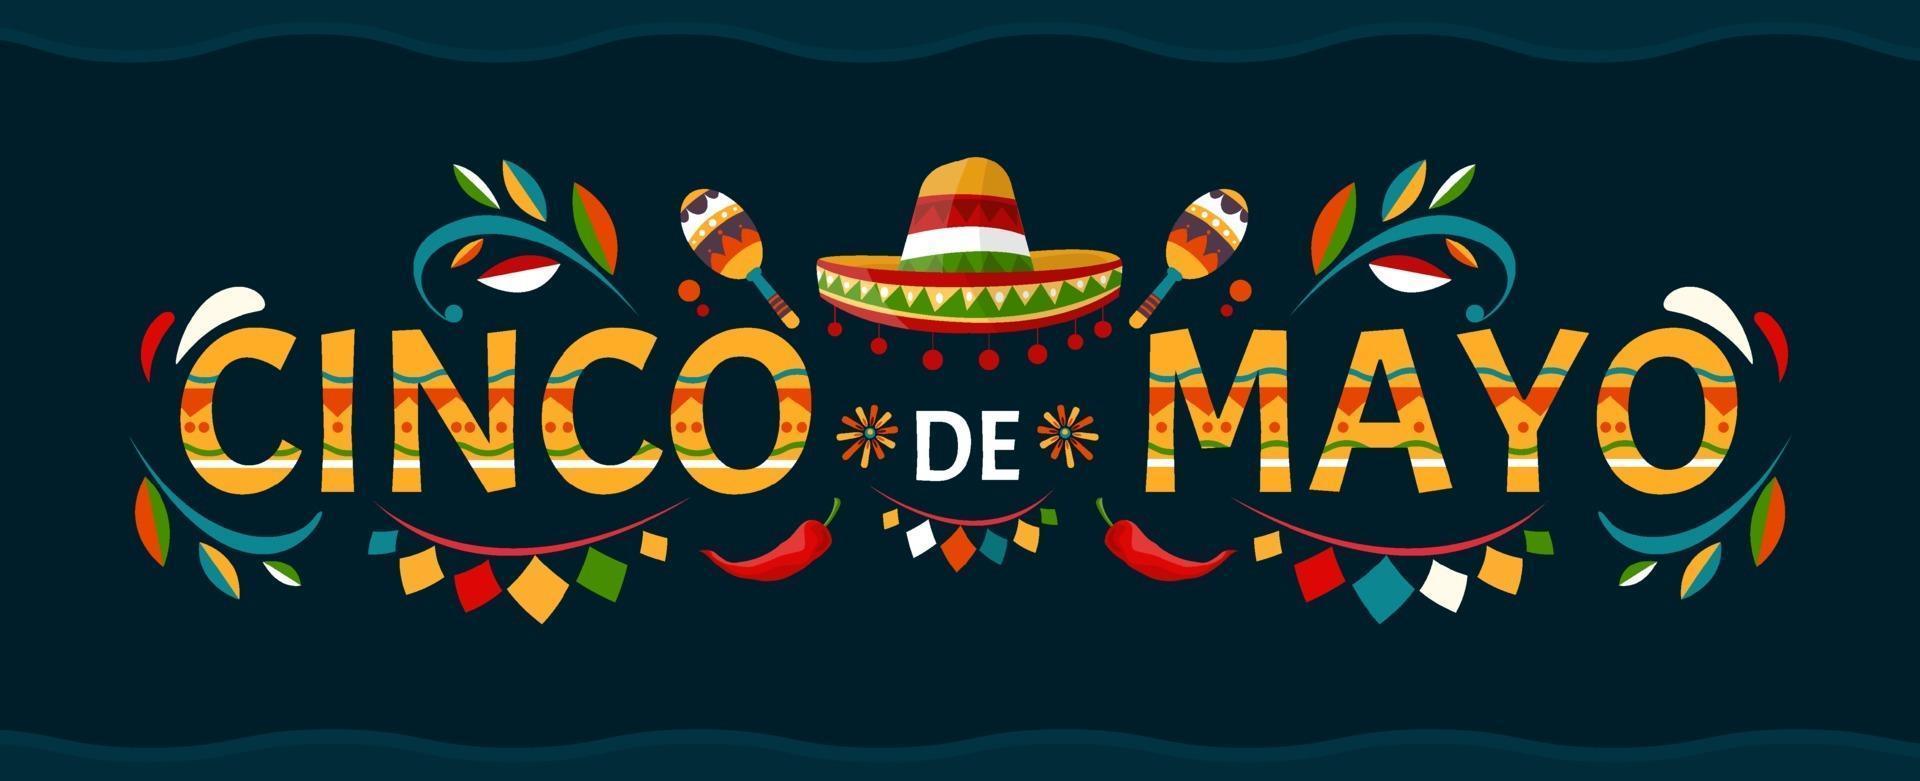 cinco-de-mayo-may-5-holiday-in-mexico-poster-with-grunge-texture-chili-peppers-and-sombrero-cartoon-style-banner-free-vector.jpg